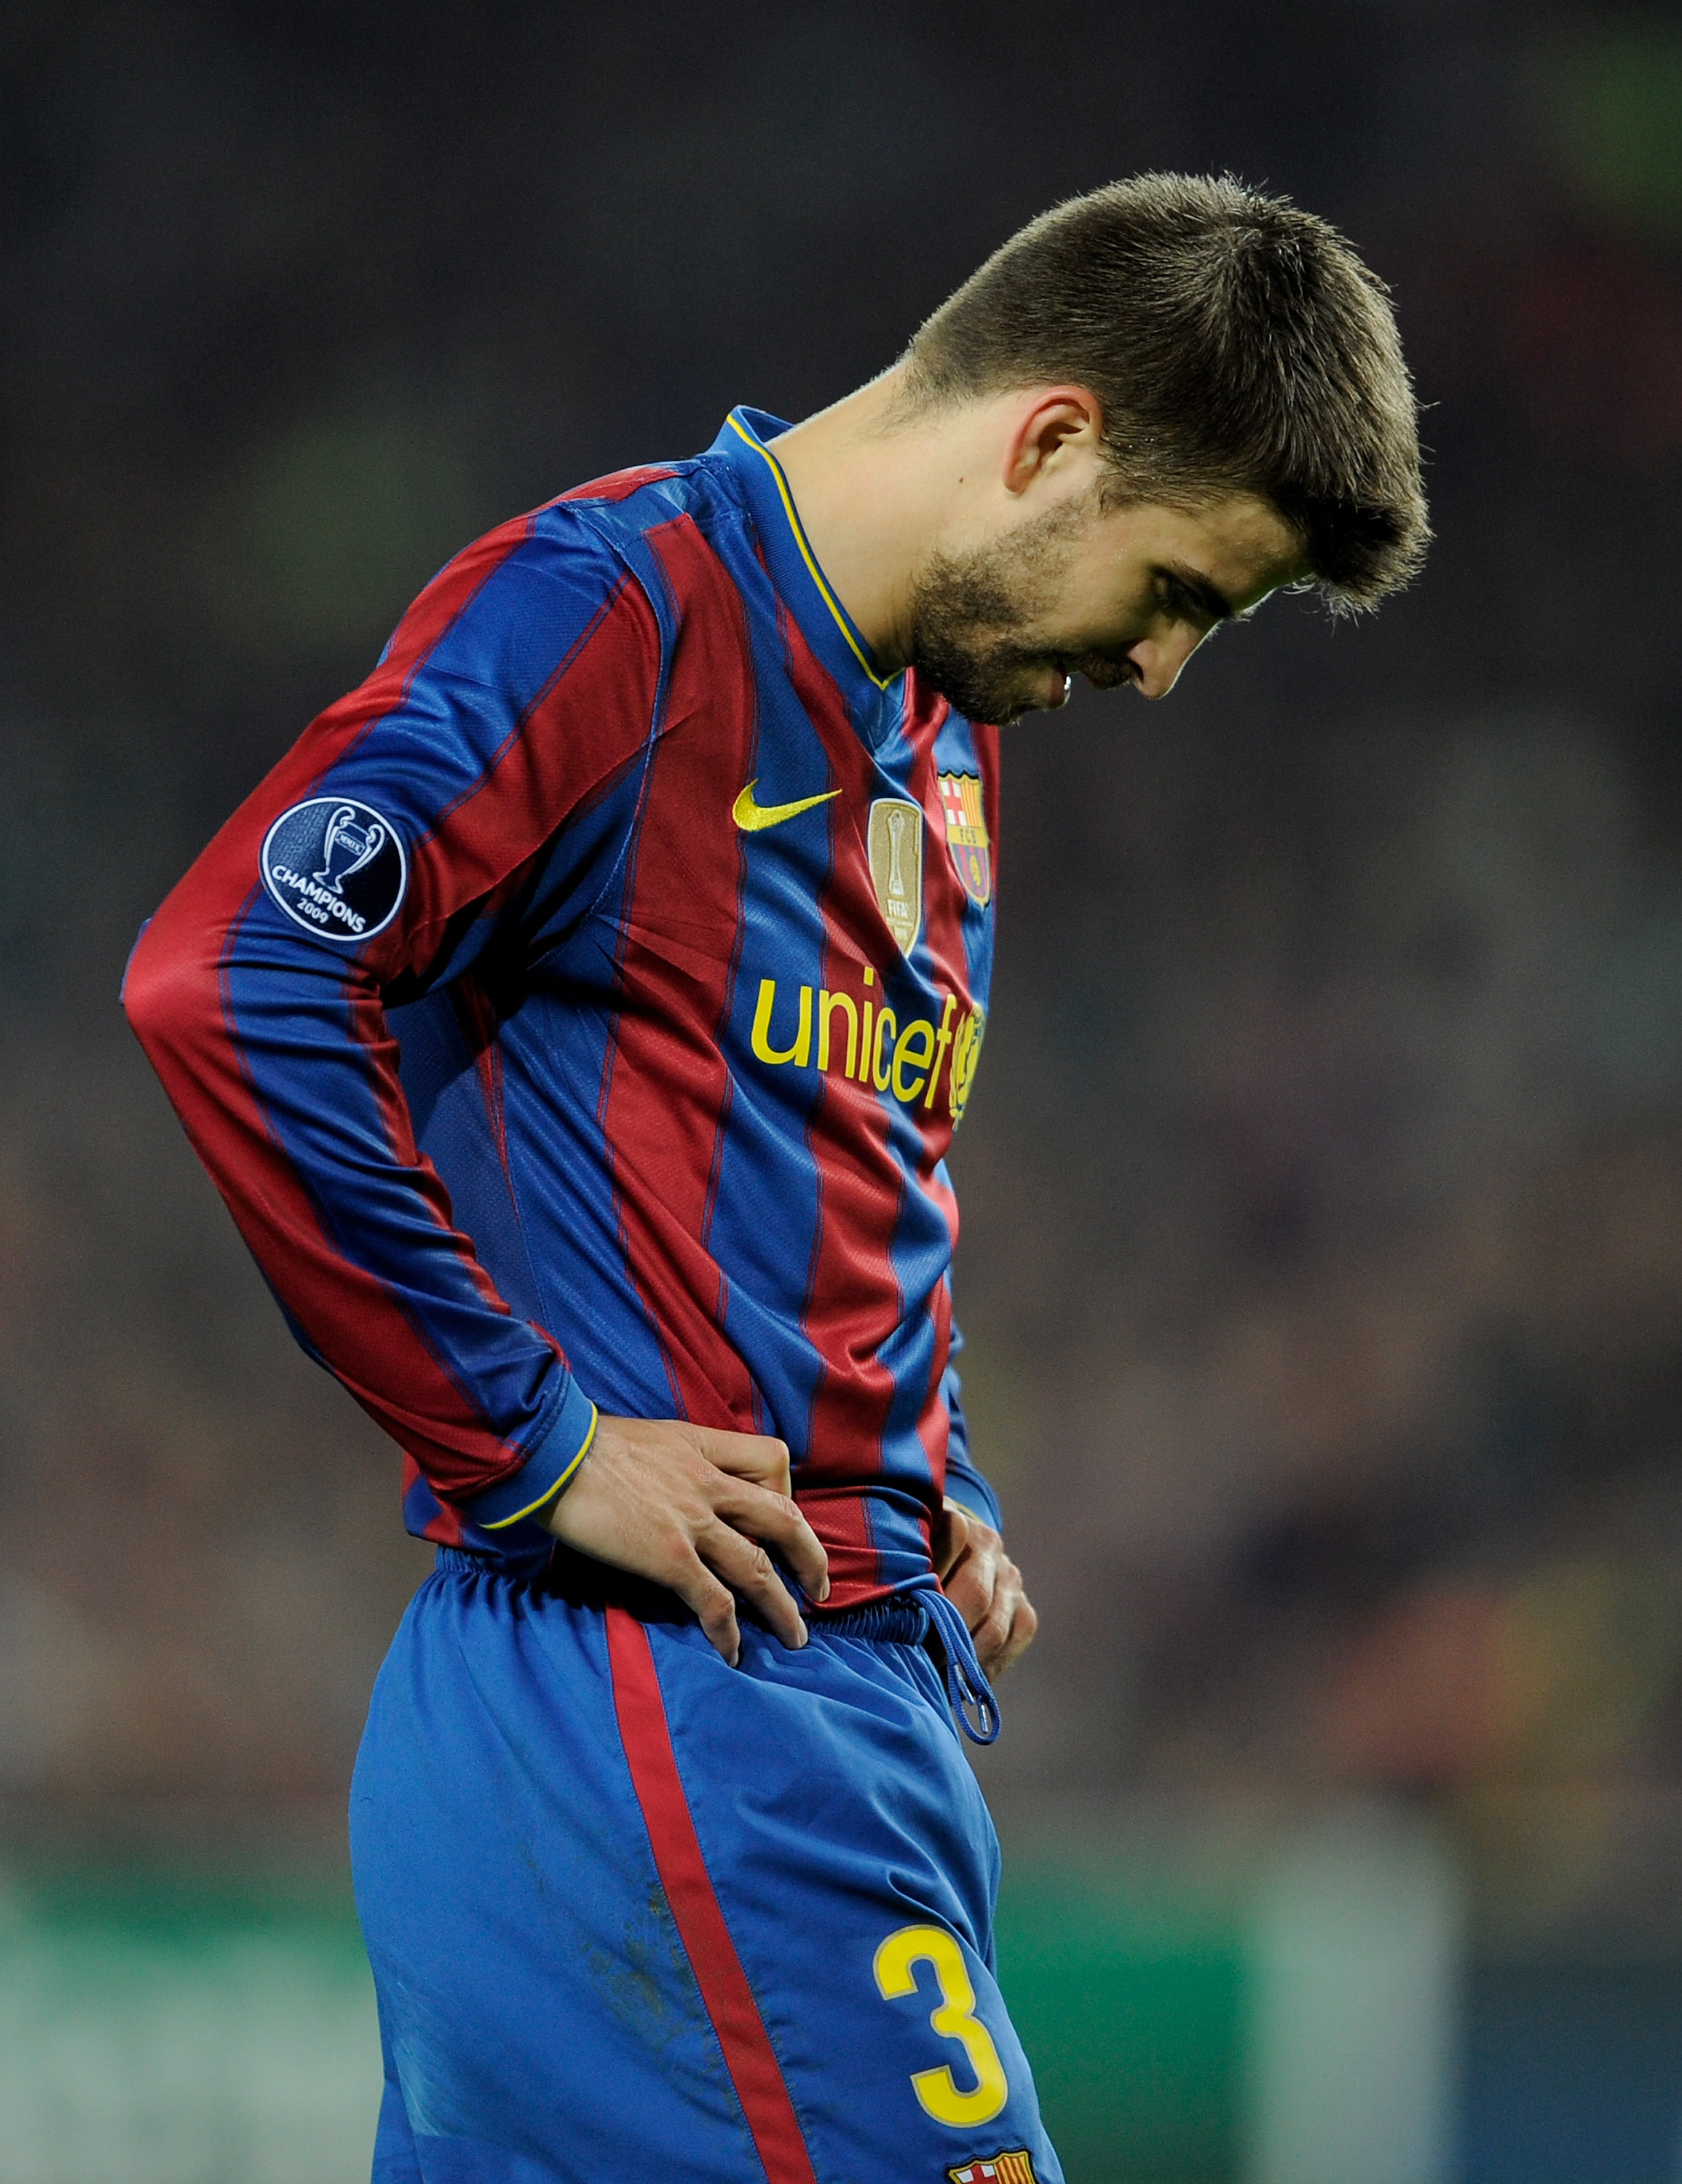 BARCELONA, SPAIN - APRIL 28:  Gerard Pique of Barcelona looks dejected during the UEFA Champions League Semi Final Second Leg match between Barcelona and Inter Milan at Camp Nou on April 28, 2010 in Barcelona, Spain.  (Photo by Michael Regan/Getty Images)